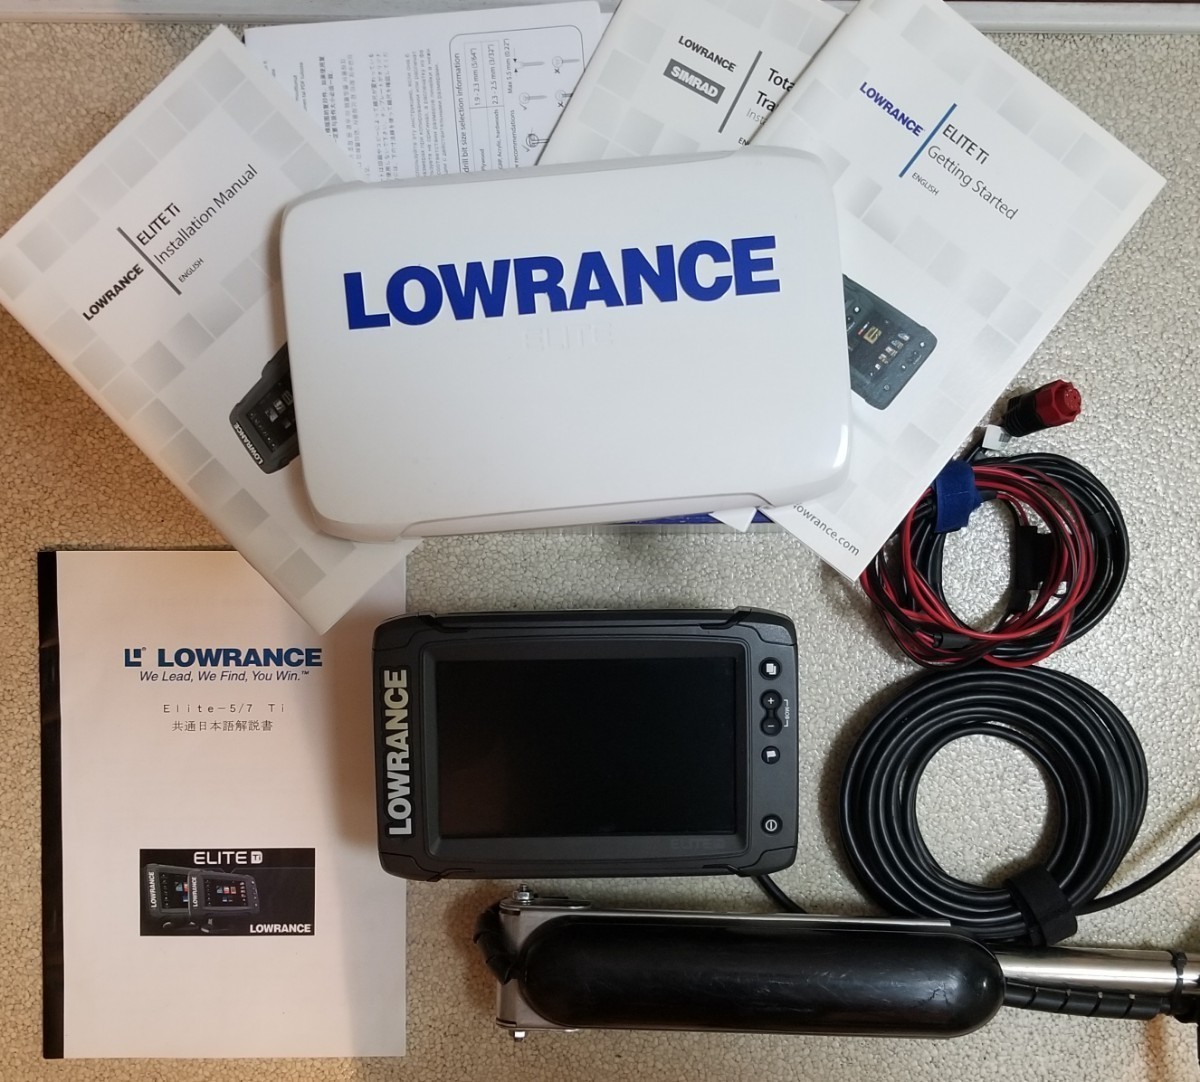 TS-DSS3-TS Combo fits Lowrance® Total Scan & Live Active Imaging 2-in-1 or  3-in-1 xDucer on a Trolling Motor – Transducer Shield and Saver